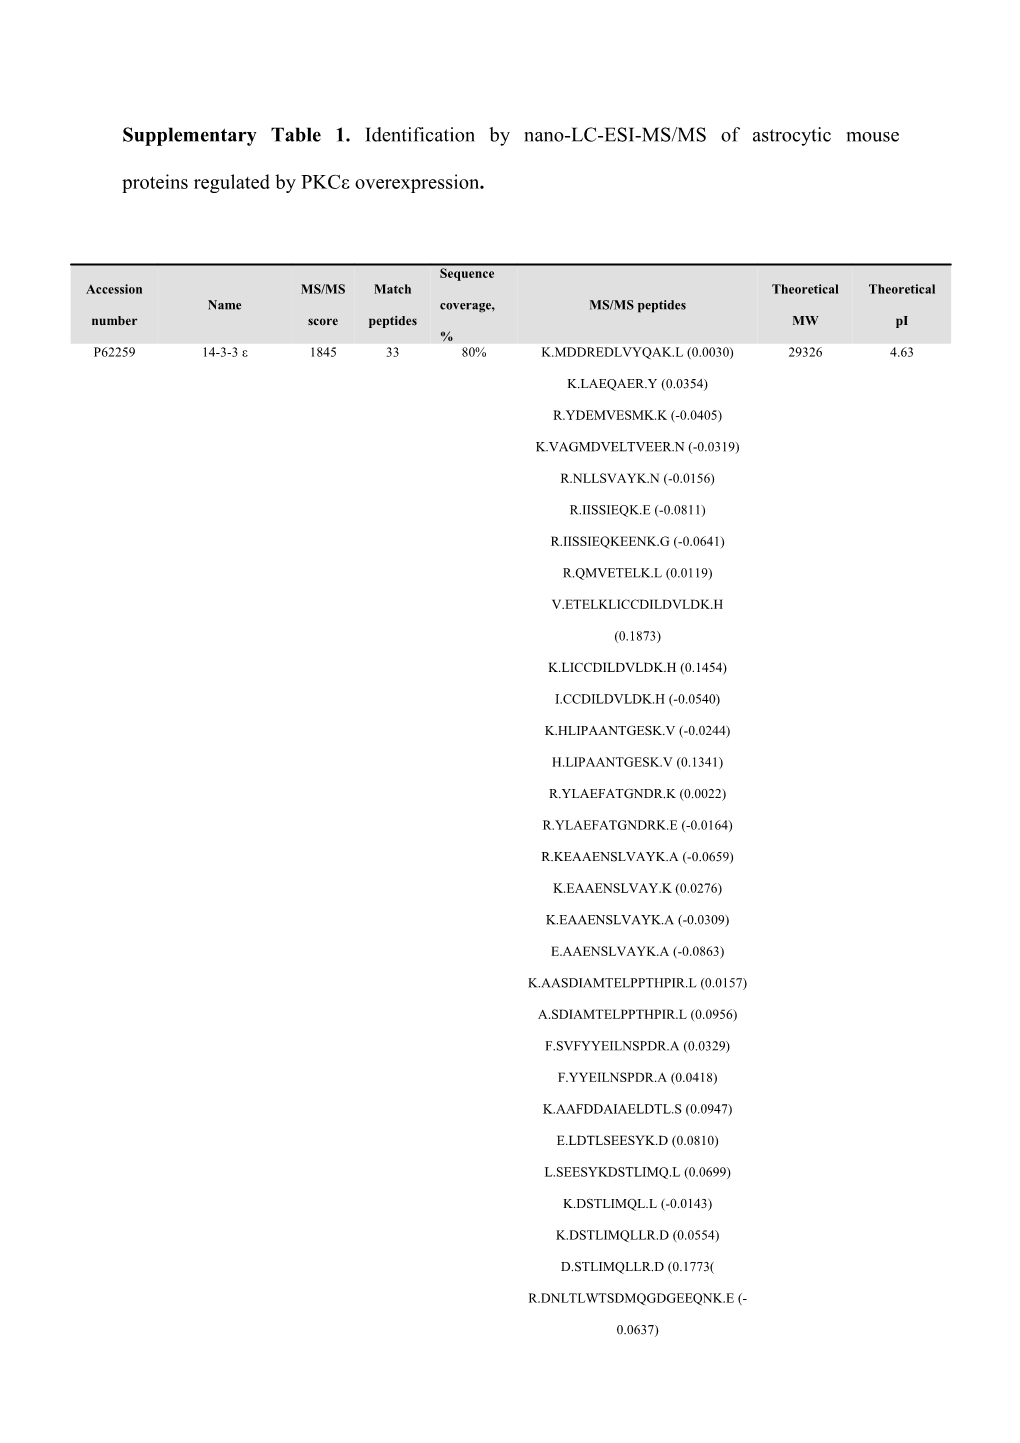 Supplementary Table 1. Identification by Nano-LC-ESI-MS/MS of Astrocyticmouse Proteins